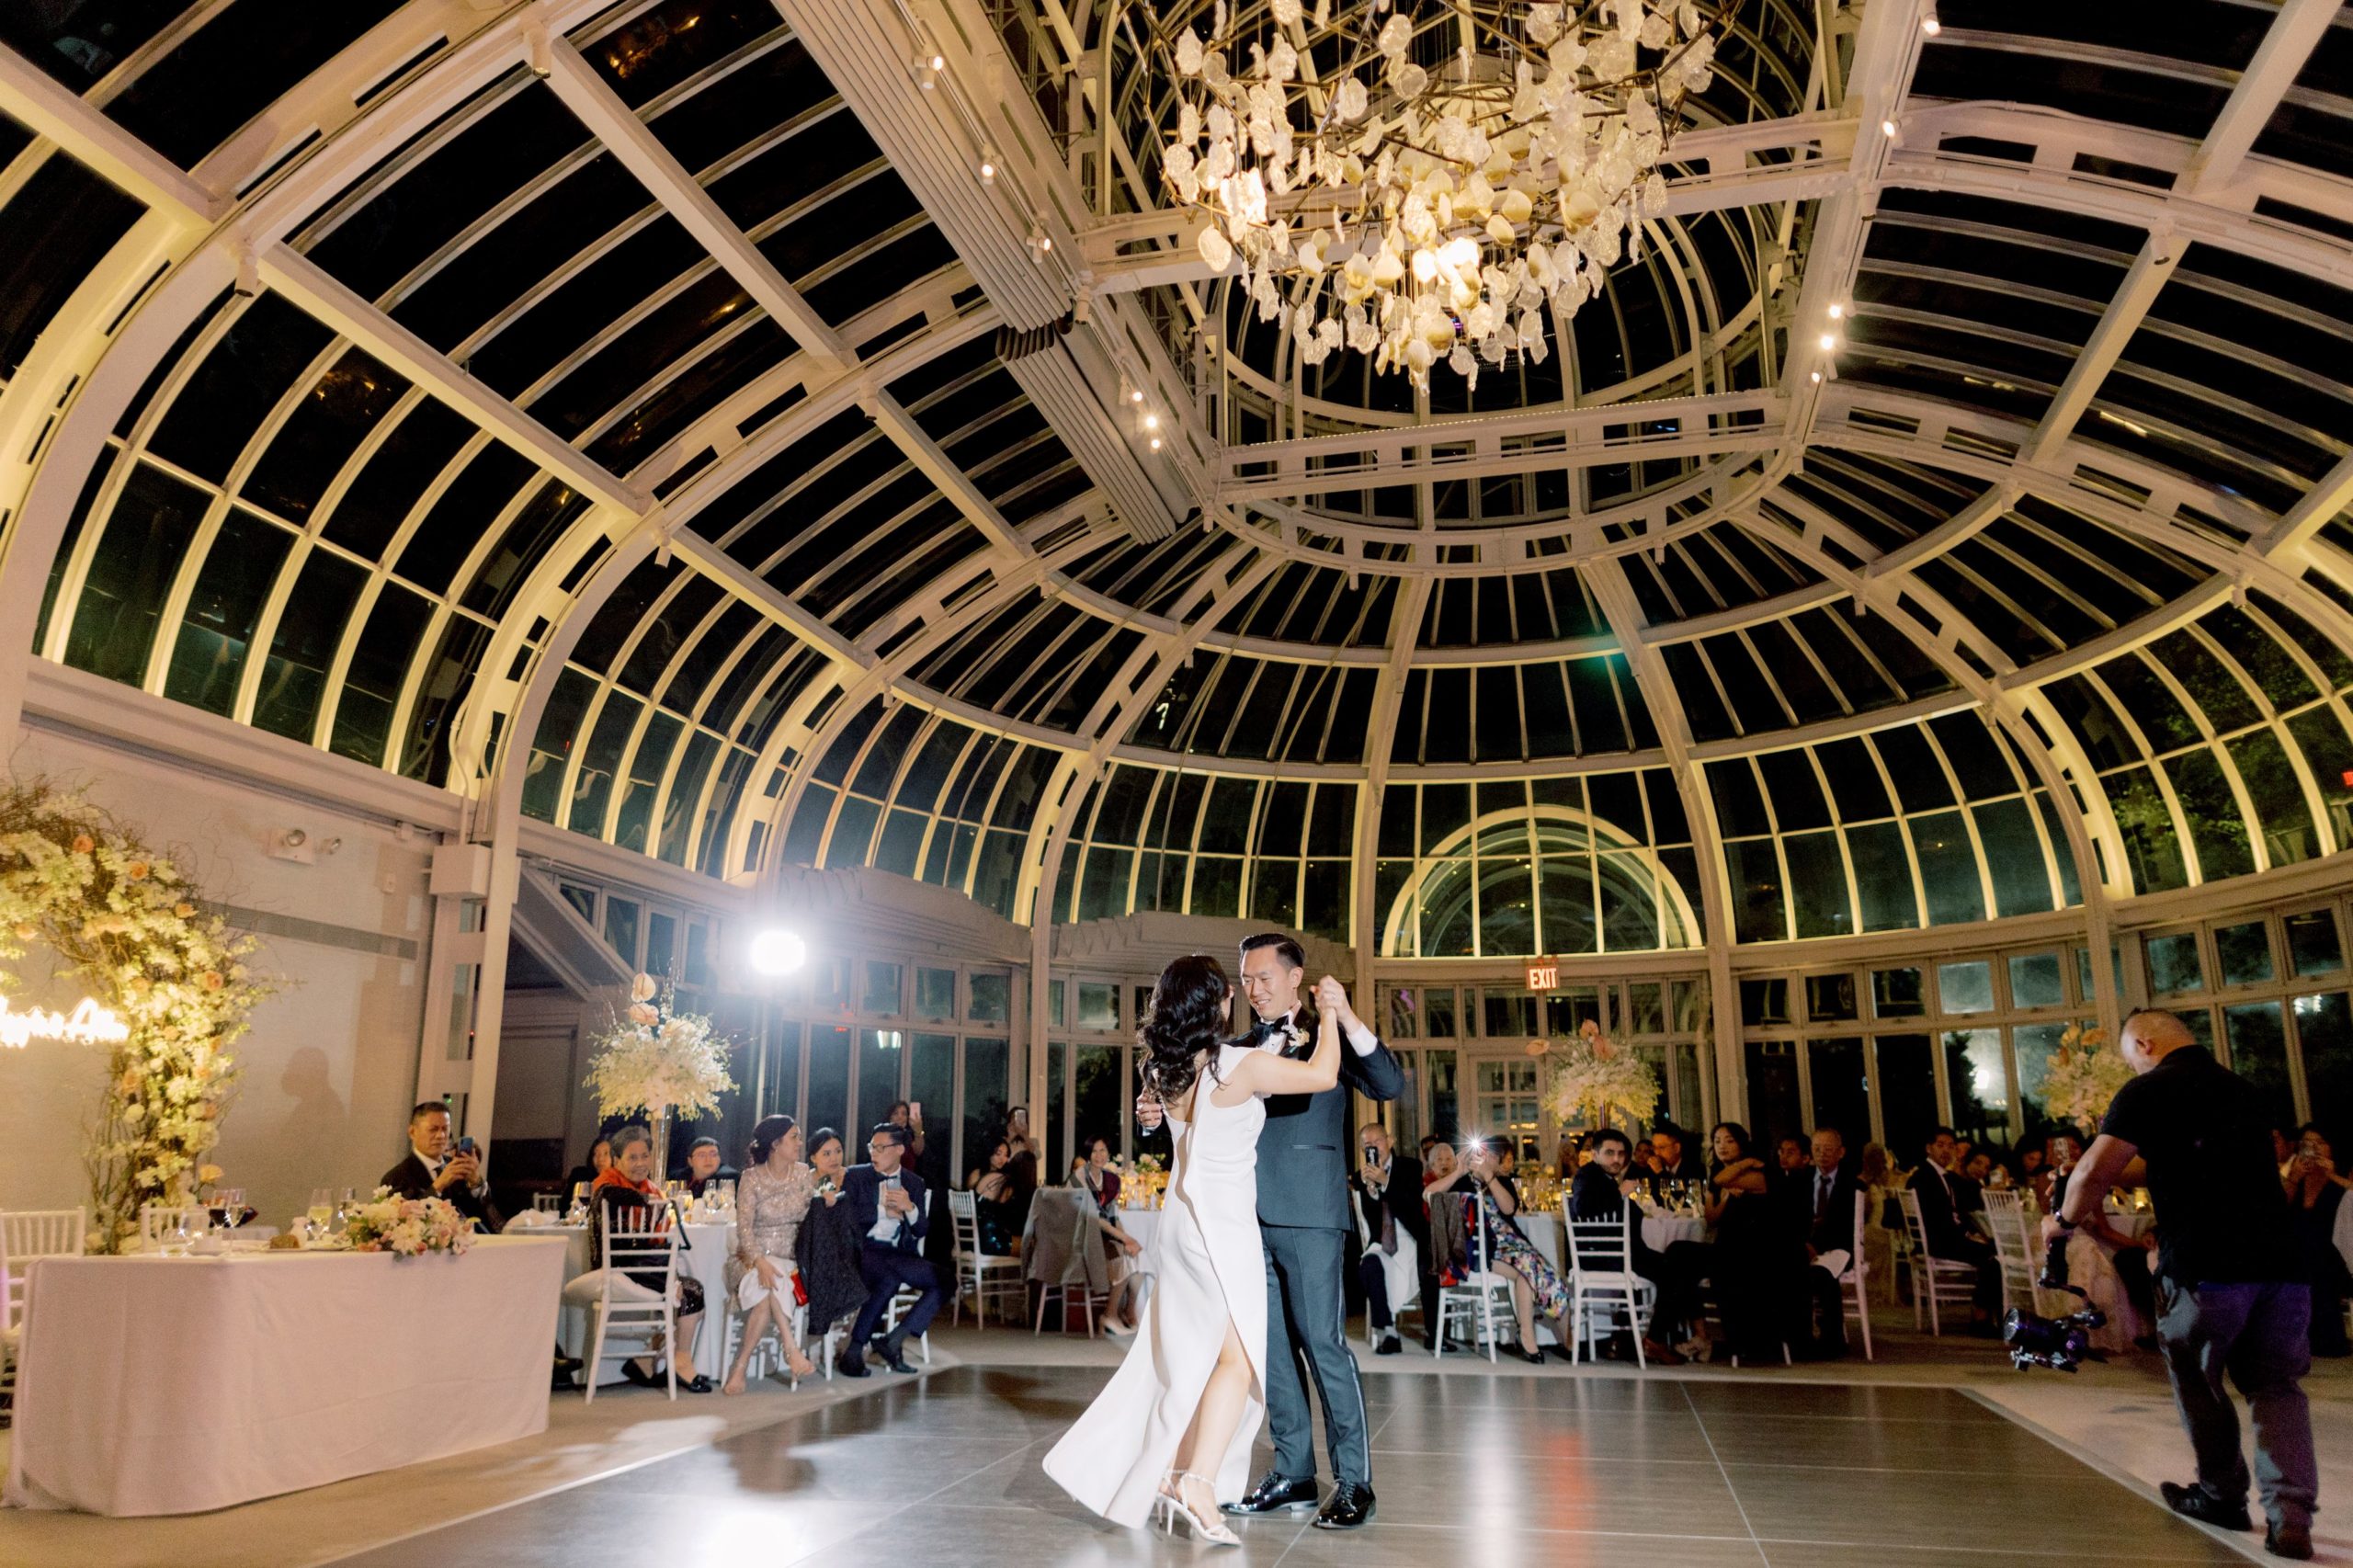 The bride and groom are doing their first dance in The Brooklyn Botanical Garden. Image by Jenny Fu Studio